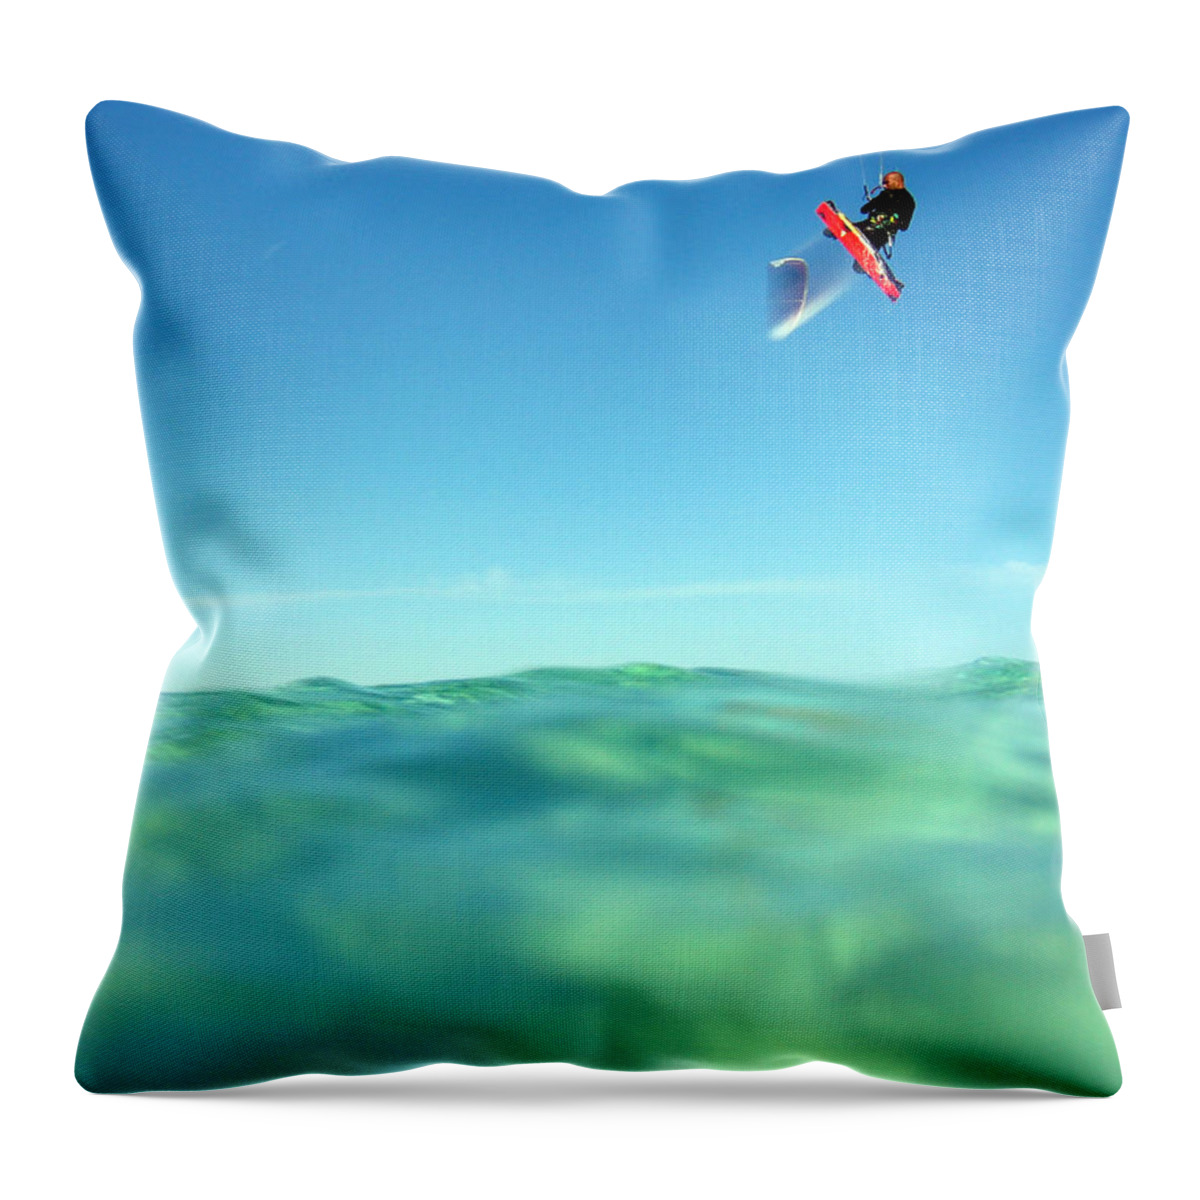 Adventure Throw Pillow featuring the photograph Kitesurfing by Stelios Kleanthous